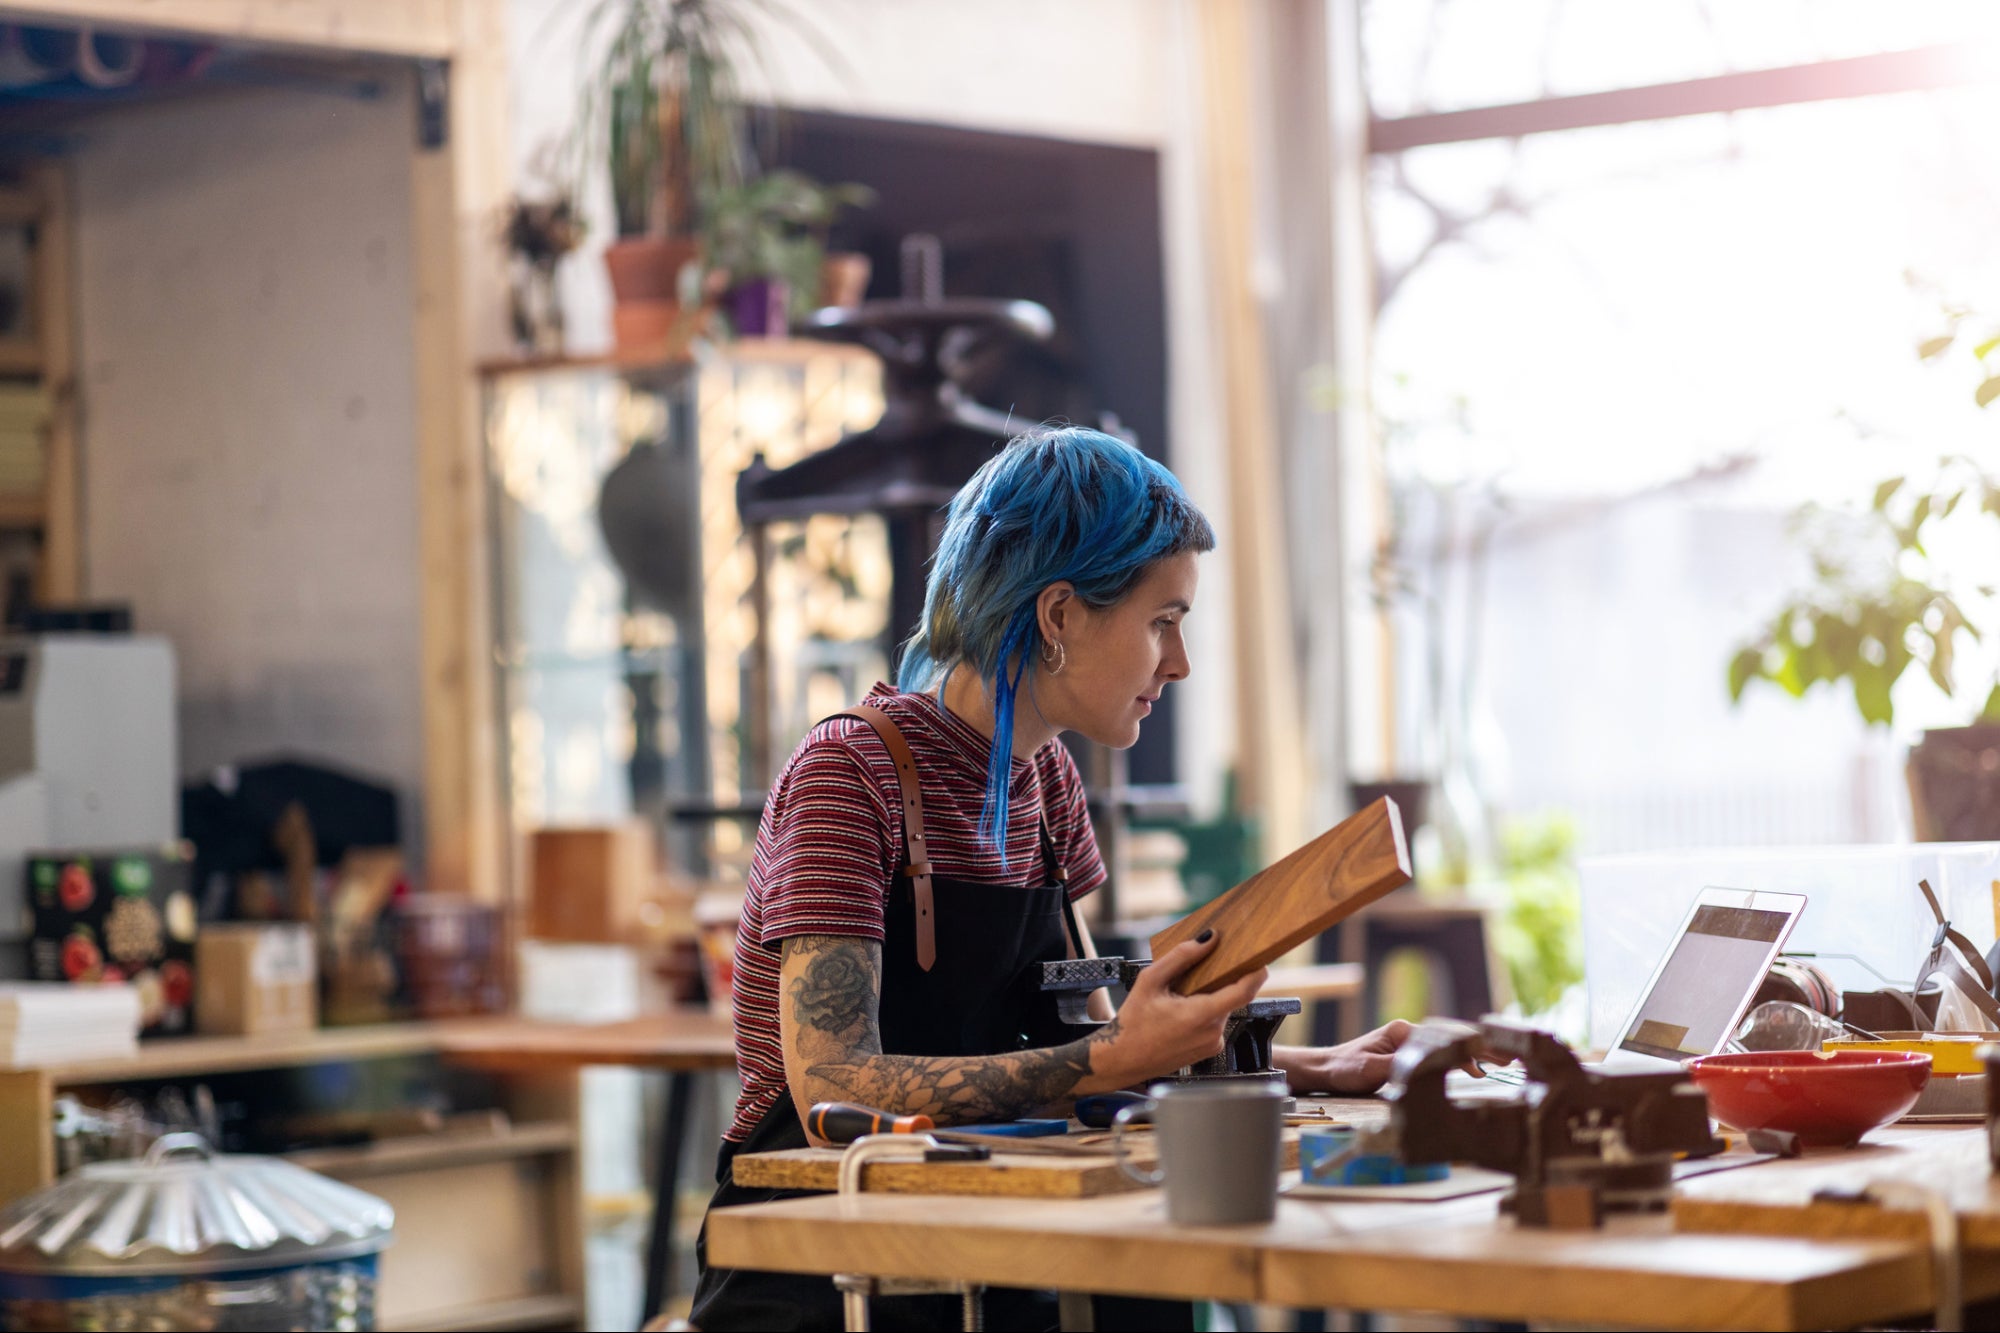 Does Your Hobby Have Business Potential? Here's How to Tell